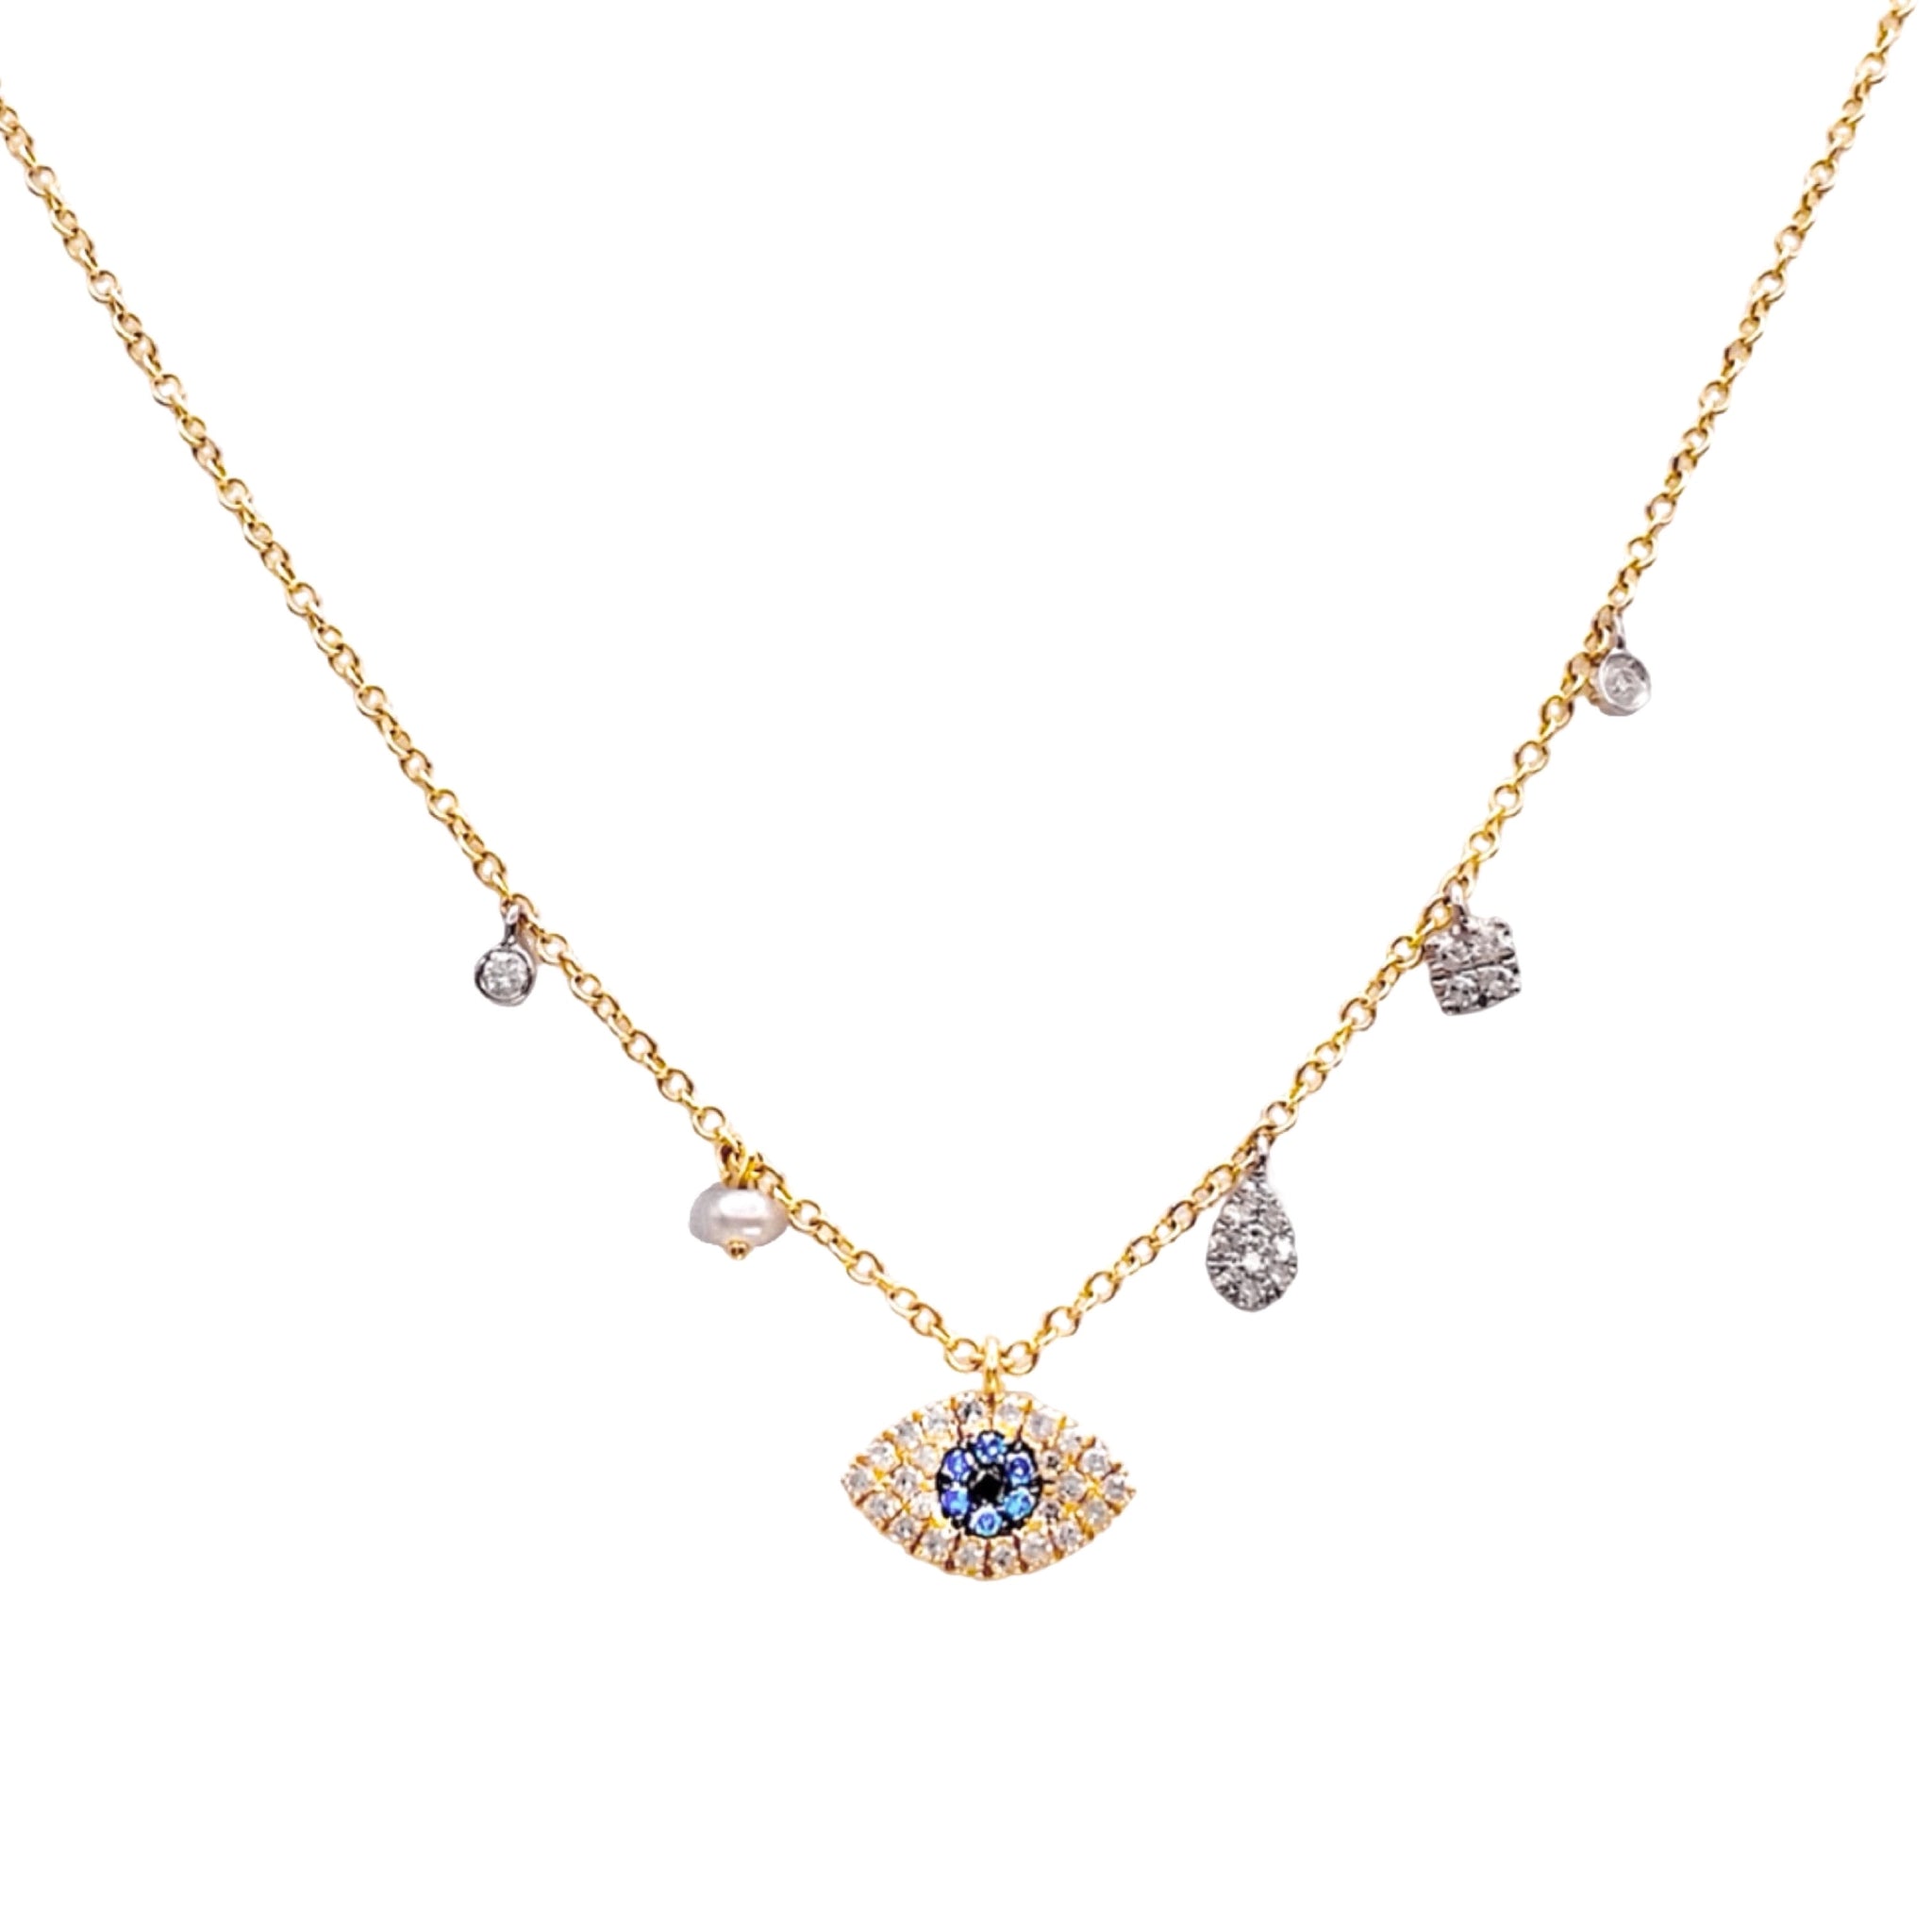 Meira T Blue & Black Diamond Evil Eye Necklace available at Shaylula Jewlery & Gifts in Tarrytown, NY and online. Accented with mixed-shaped diamond charms and a luminous pearl, this 14K yellow gold necklace features an evil eye pendant adorned with shimmering white, blue and black diamonds.  • 14k, .19 ct dia, pearl  • 18" L  • Lobster clasp